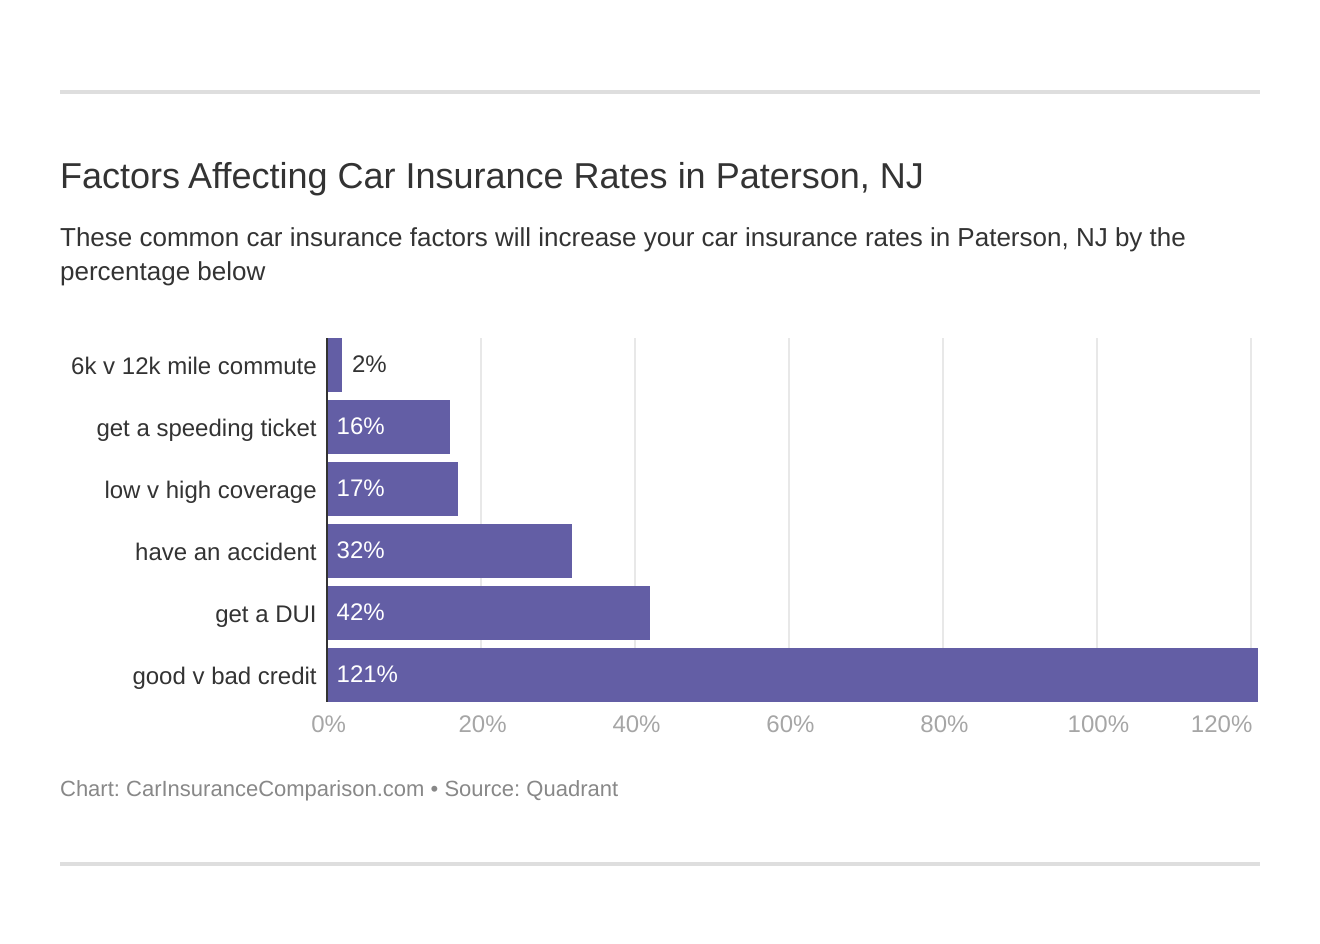 Factors Affecting Car Insurance Rates in Paterson, NJ